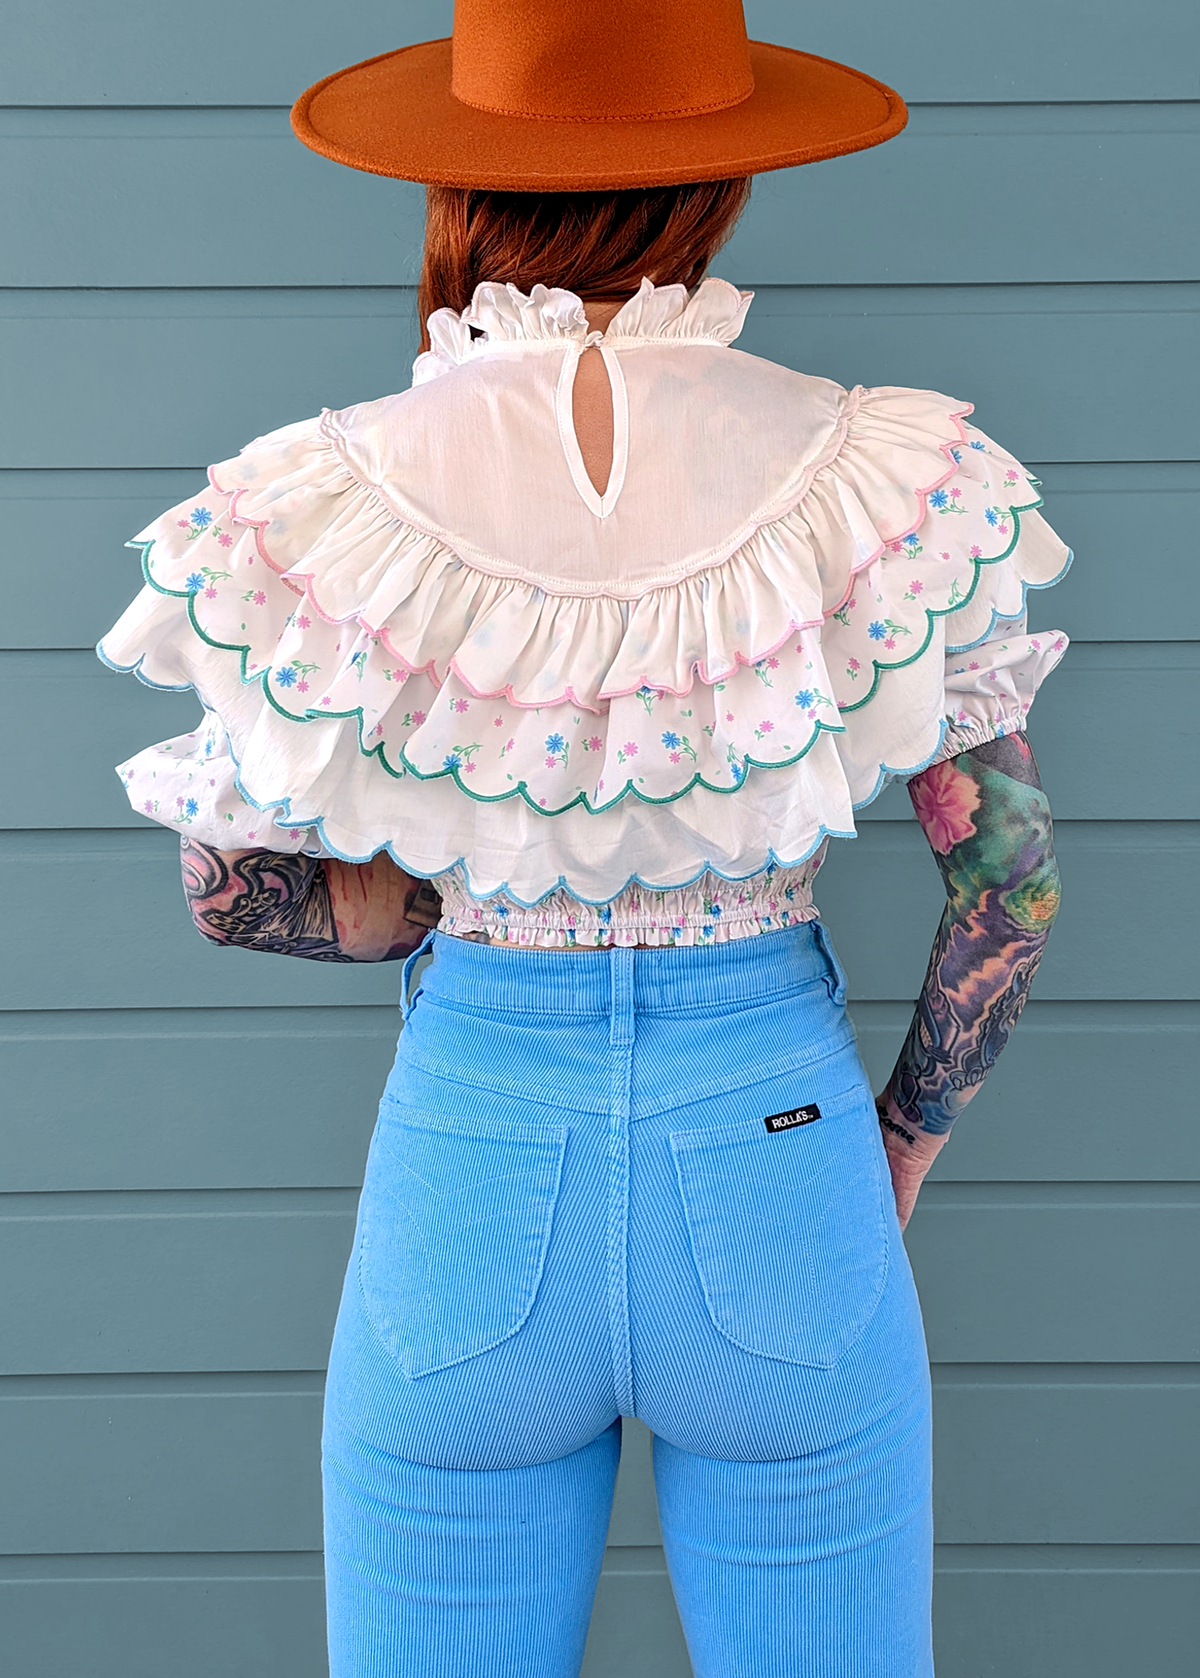 80s inspired prairie ruffle crop blouse with tiered ruffles, high neckline, embroidered floral details, puff sleeved, and smocked bottom. White cotton with blue and pink floral pattern. By Glamorous UK